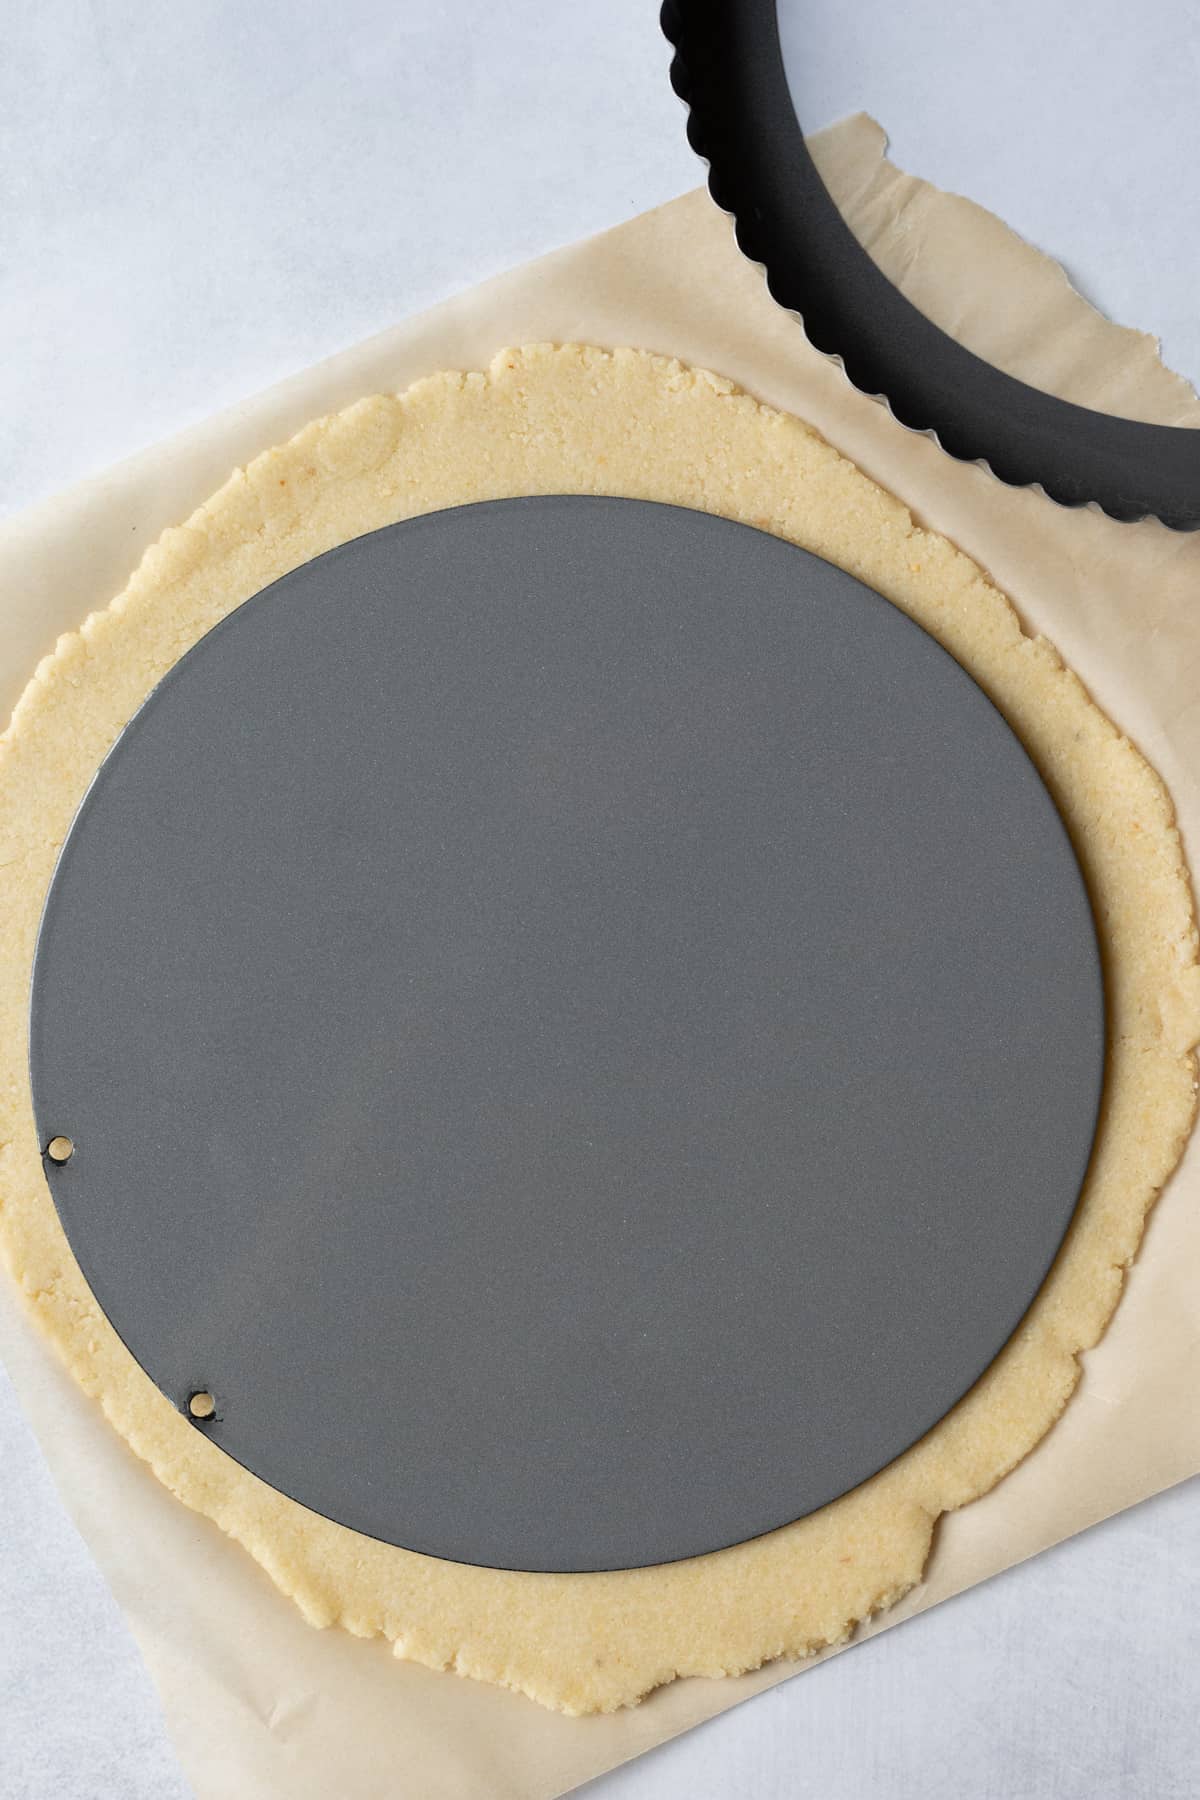 removable bottom of tart pan lying on rolled out dough, ready to flip